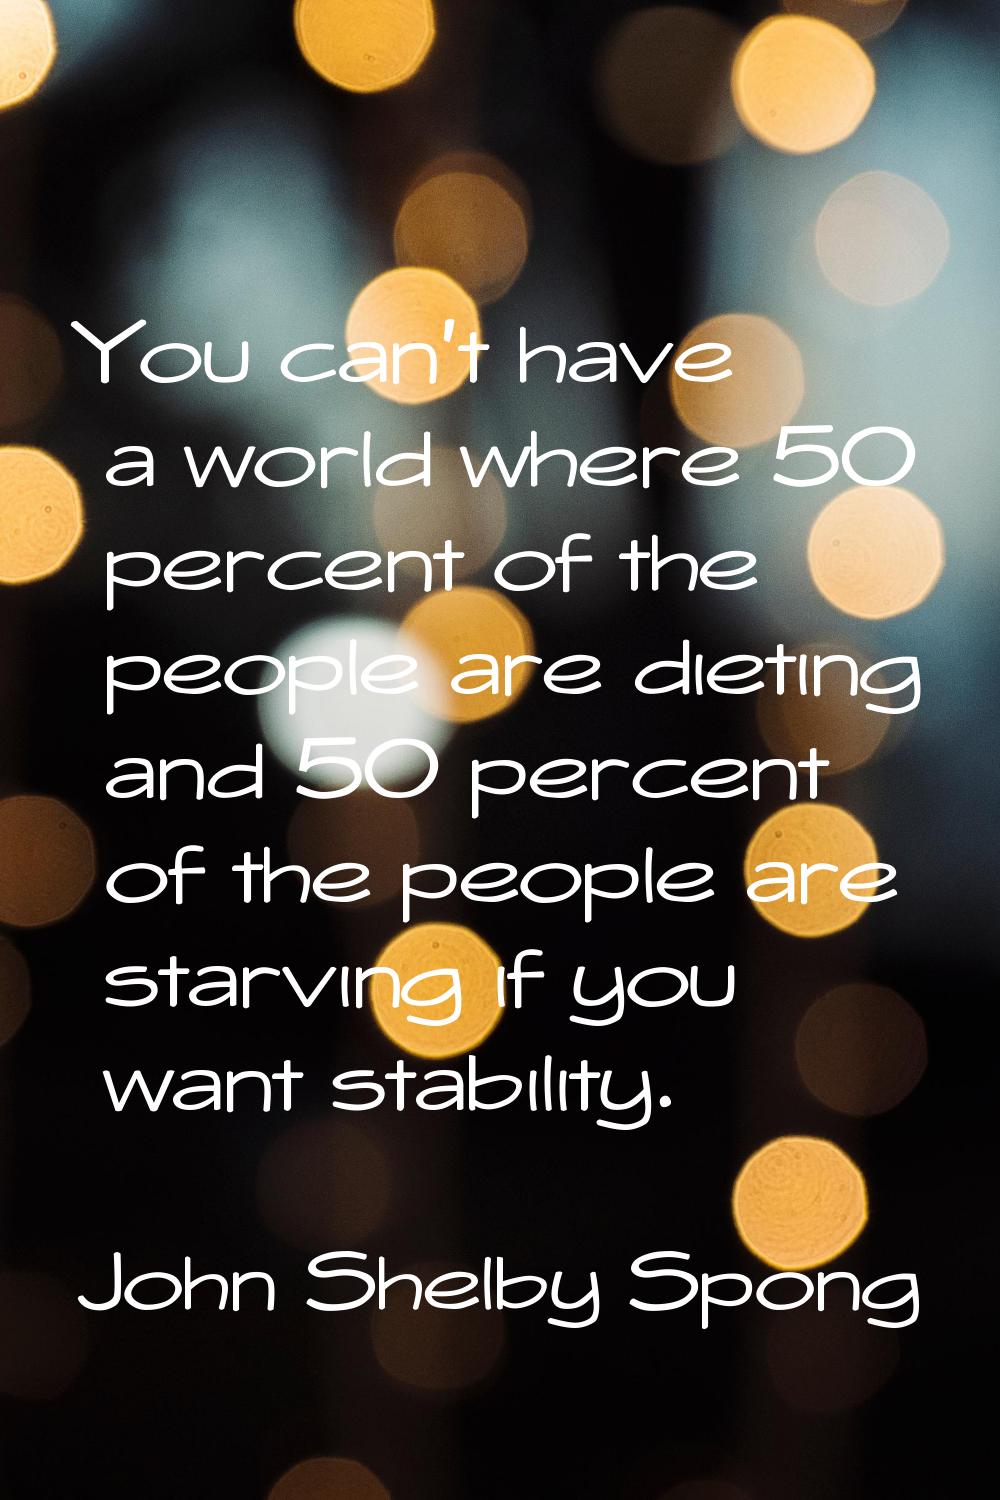 You can't have a world where 50 percent of the people are dieting and 50 percent of the people are 